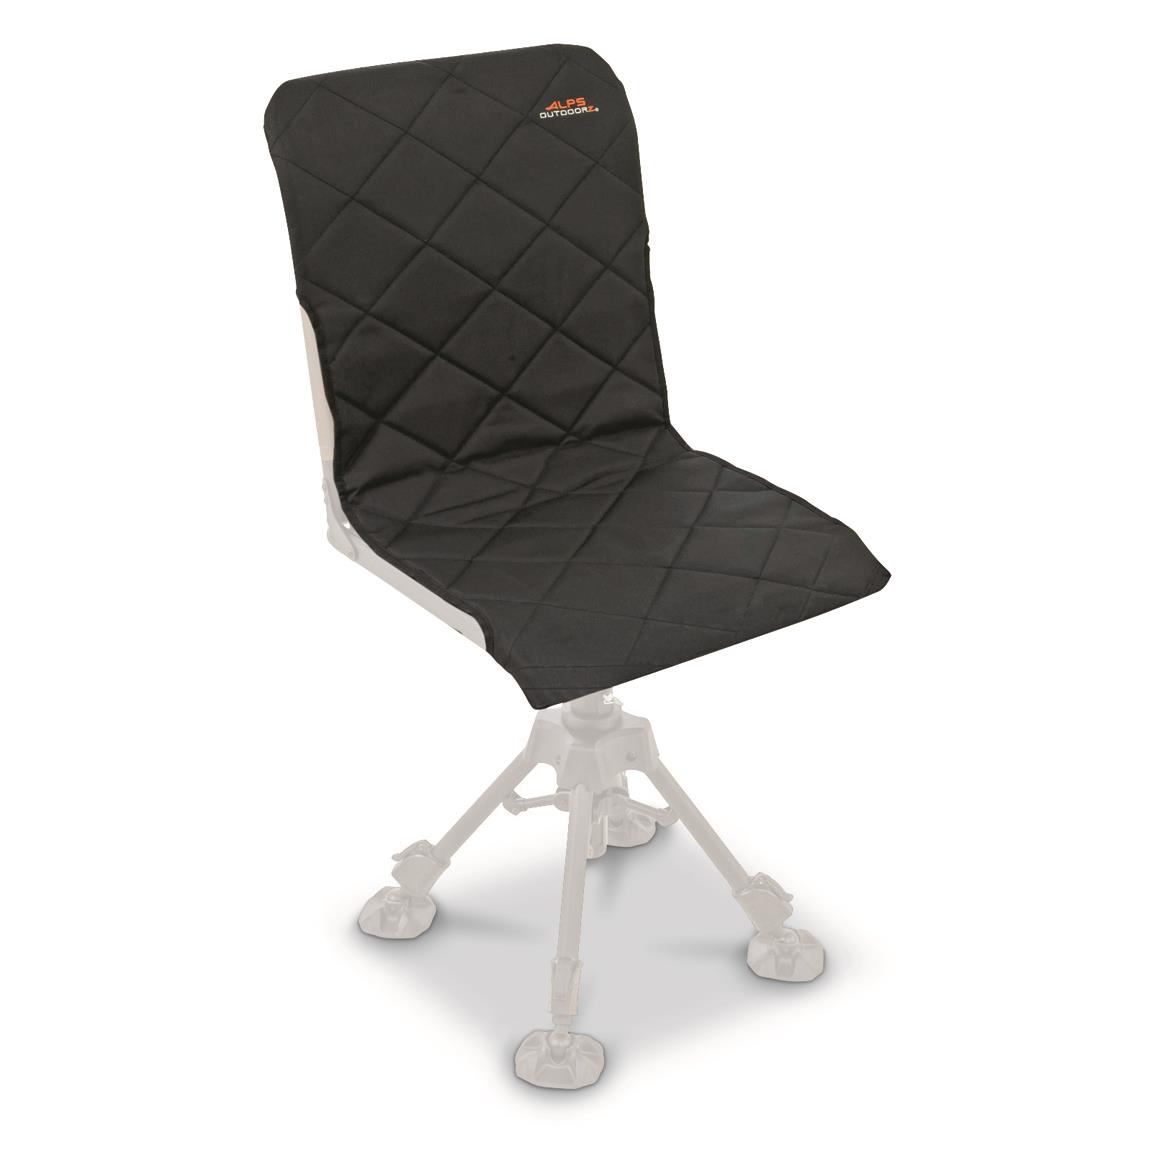 Compatible with ALPS OutdoorZ Stealth Hunter, Stealth Hunter Deluxe, Huntsman, and Roost Chair